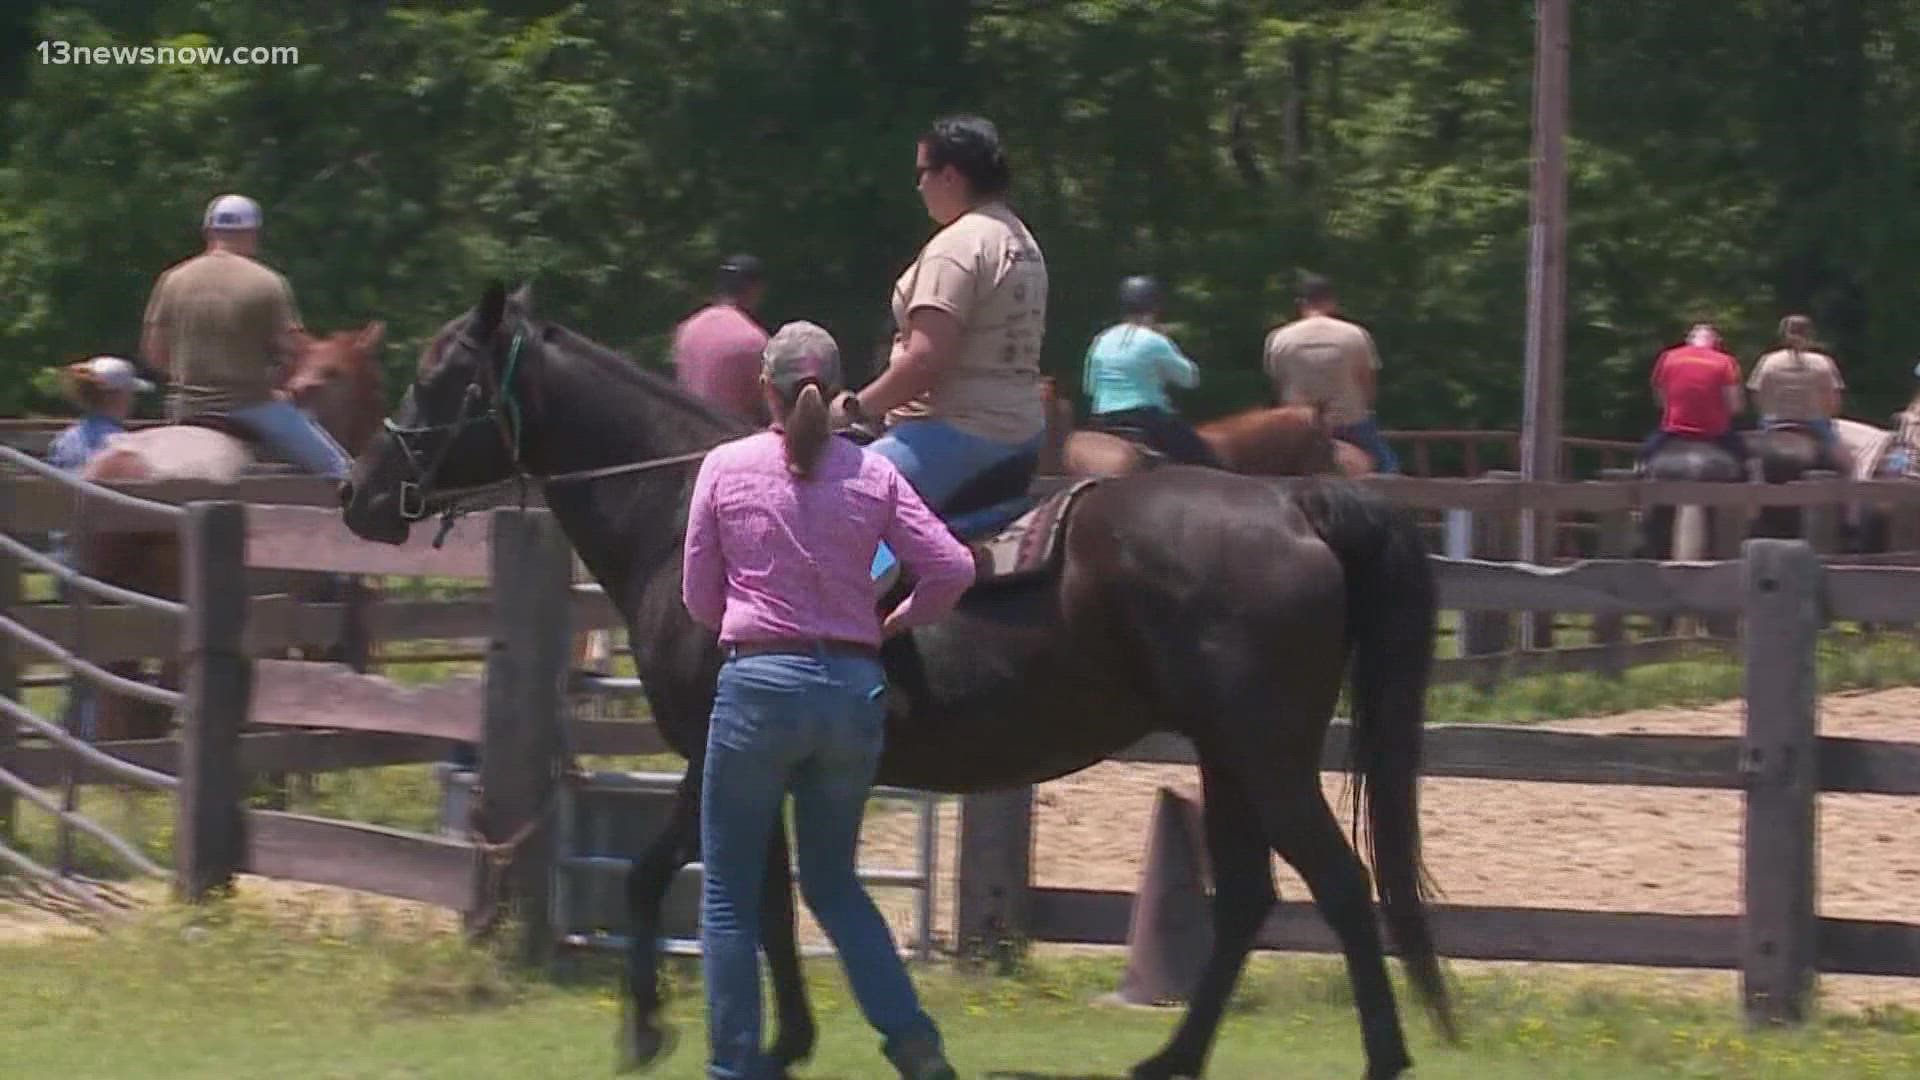 The EquiVets program started in 2010. Participants say getting out of normal routines can help their mental health, and spending time with horses makes them calm.